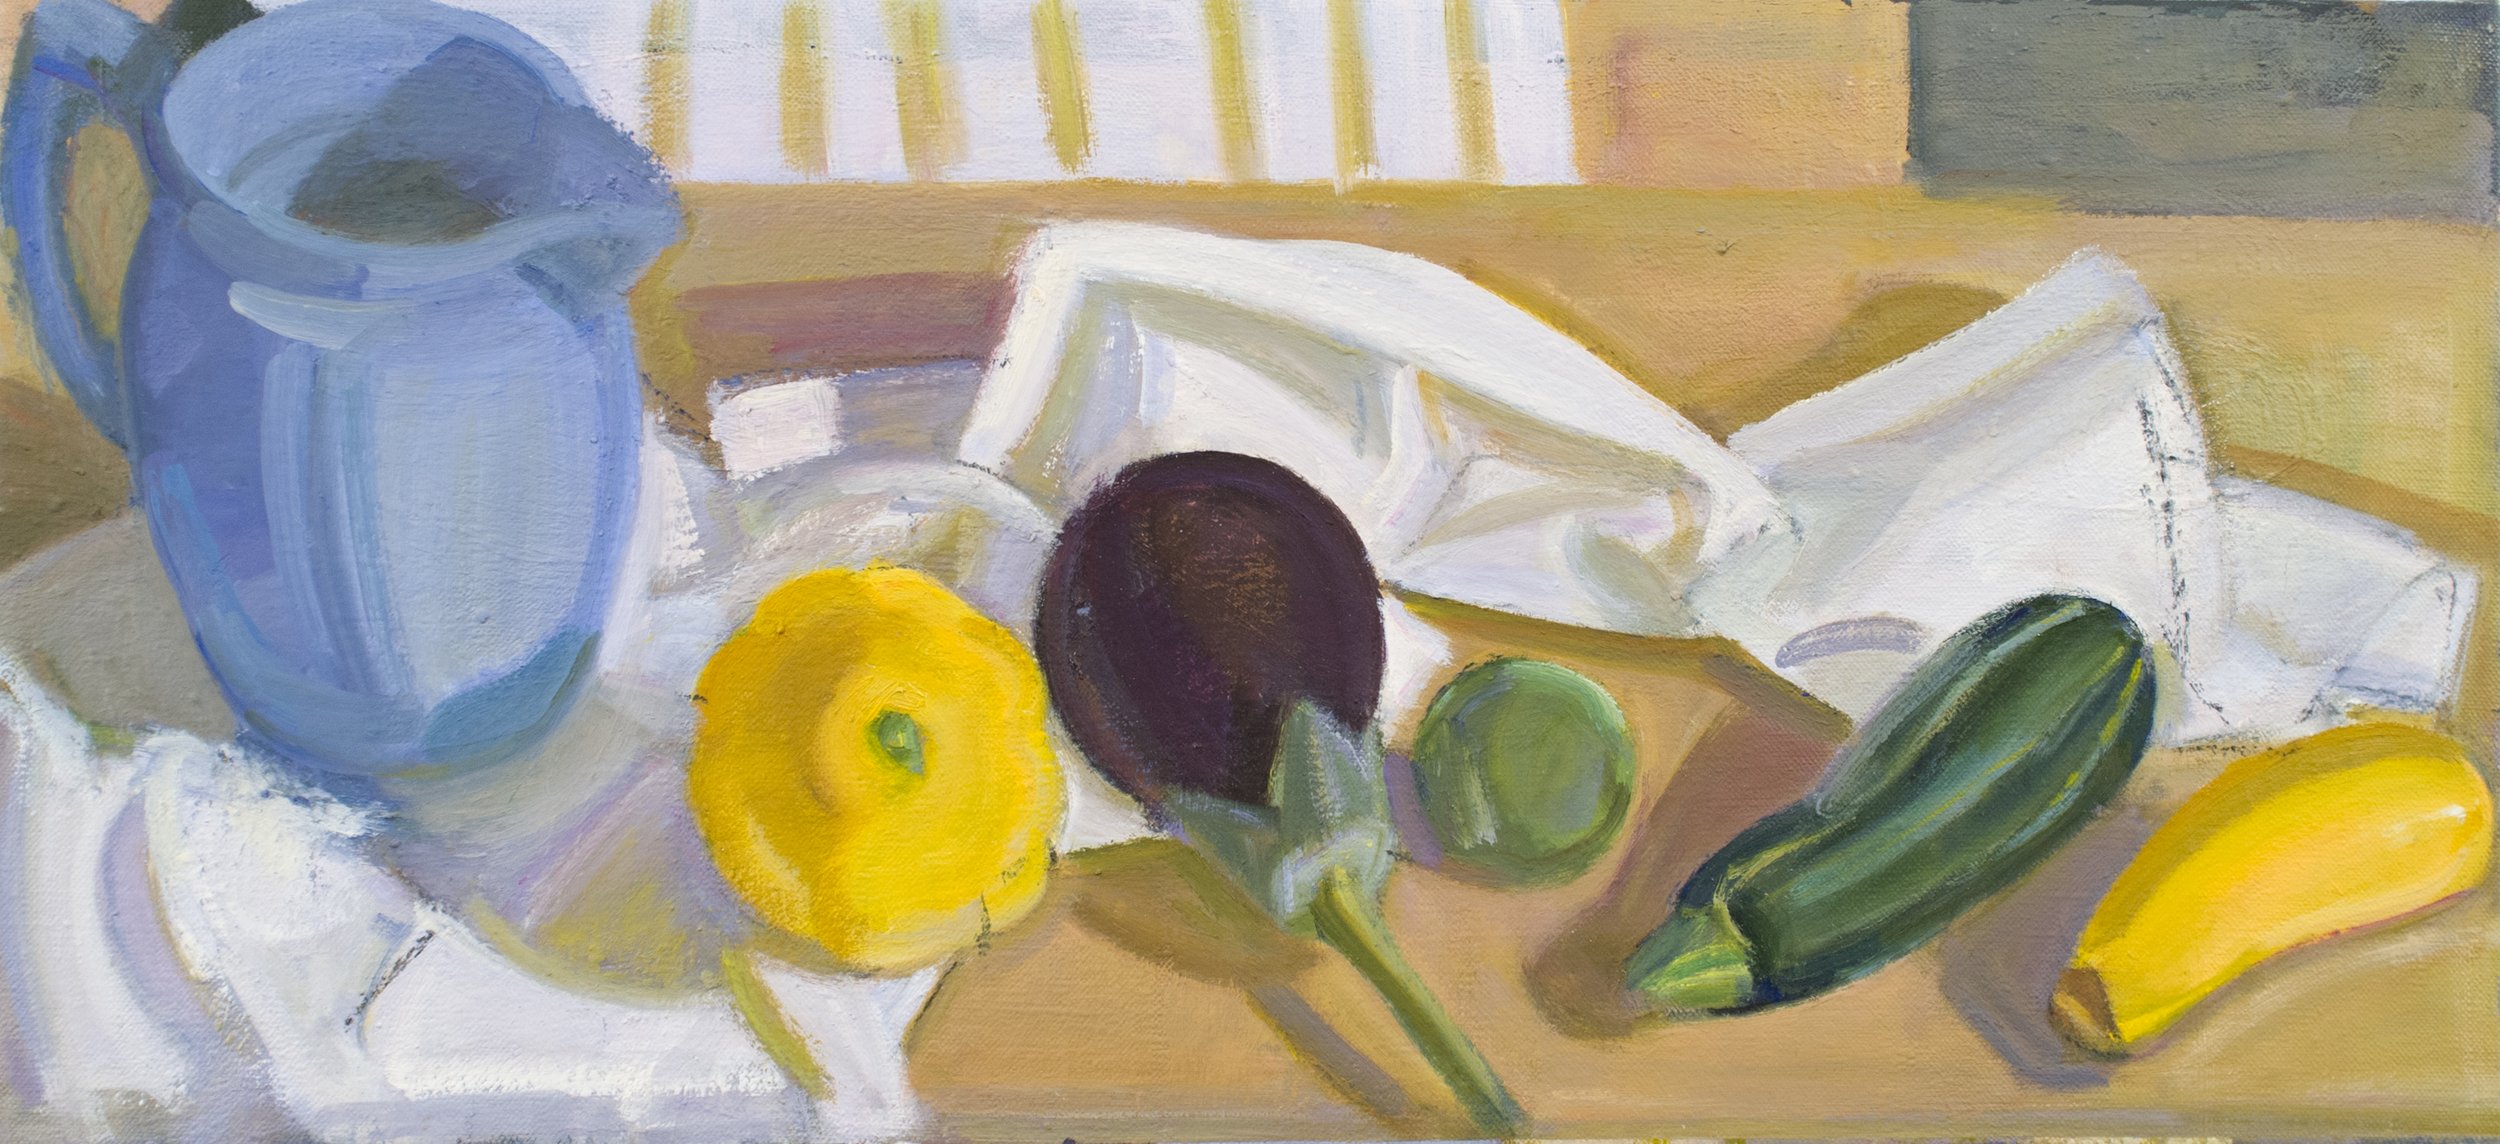   Blue Pitcher With Squash and Eggplant , 2014, oil/canvas, 11 x 24 in., Private Collection 